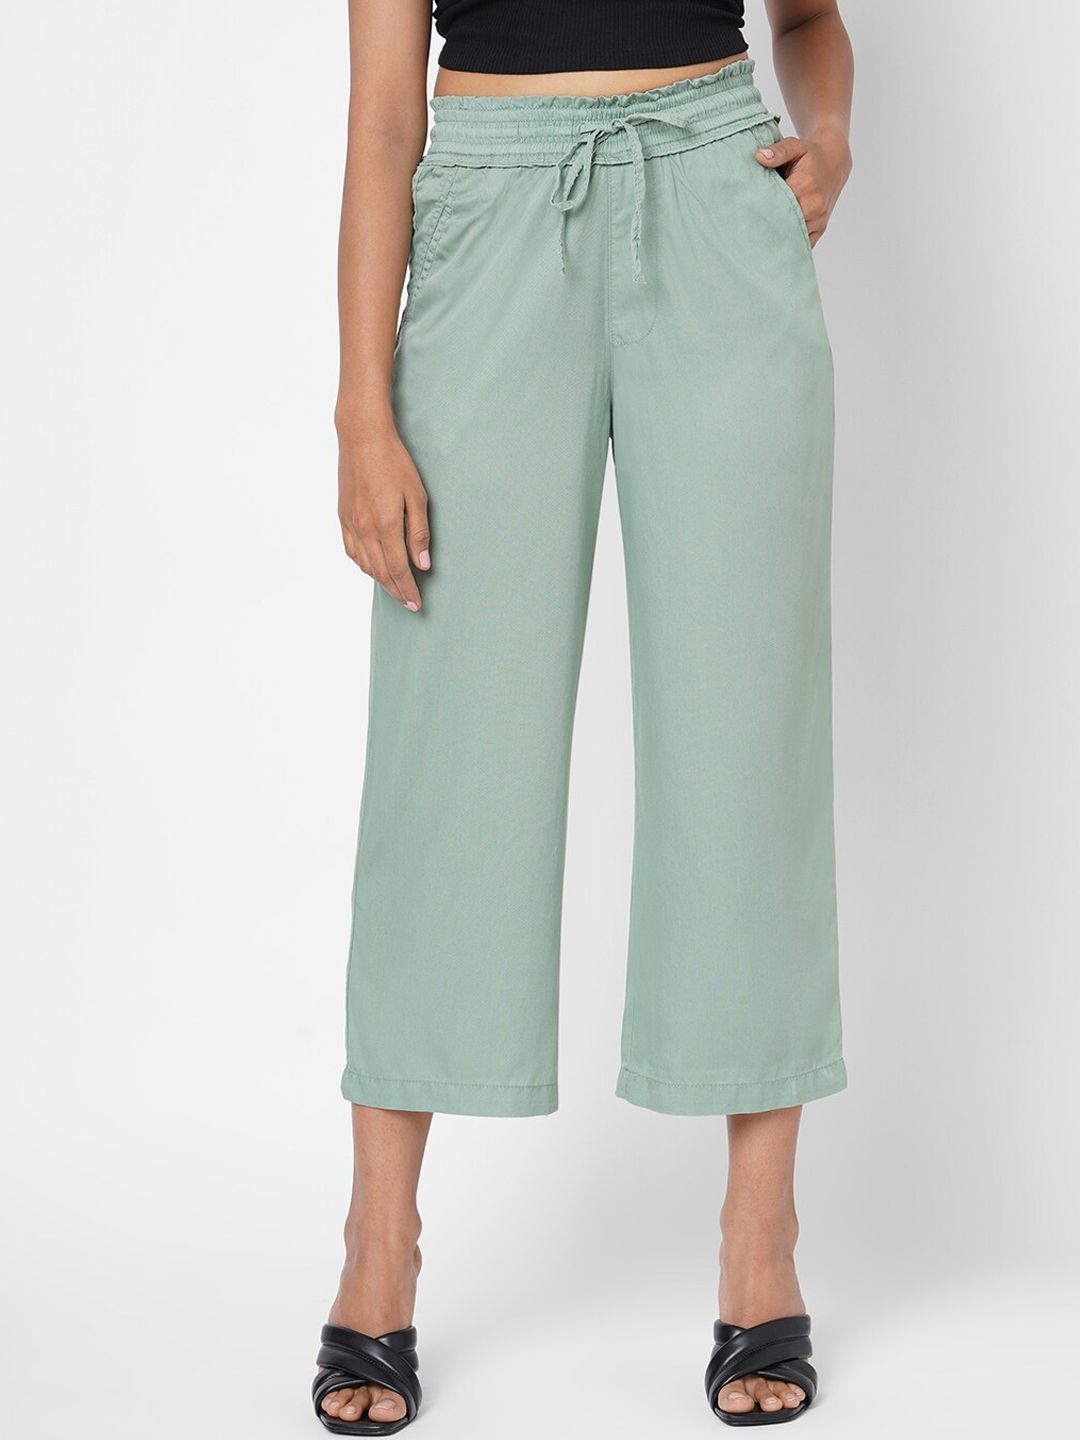 Kraus Jeans Women Green Loose Fit High-Rise Culottes Trousers Price in India